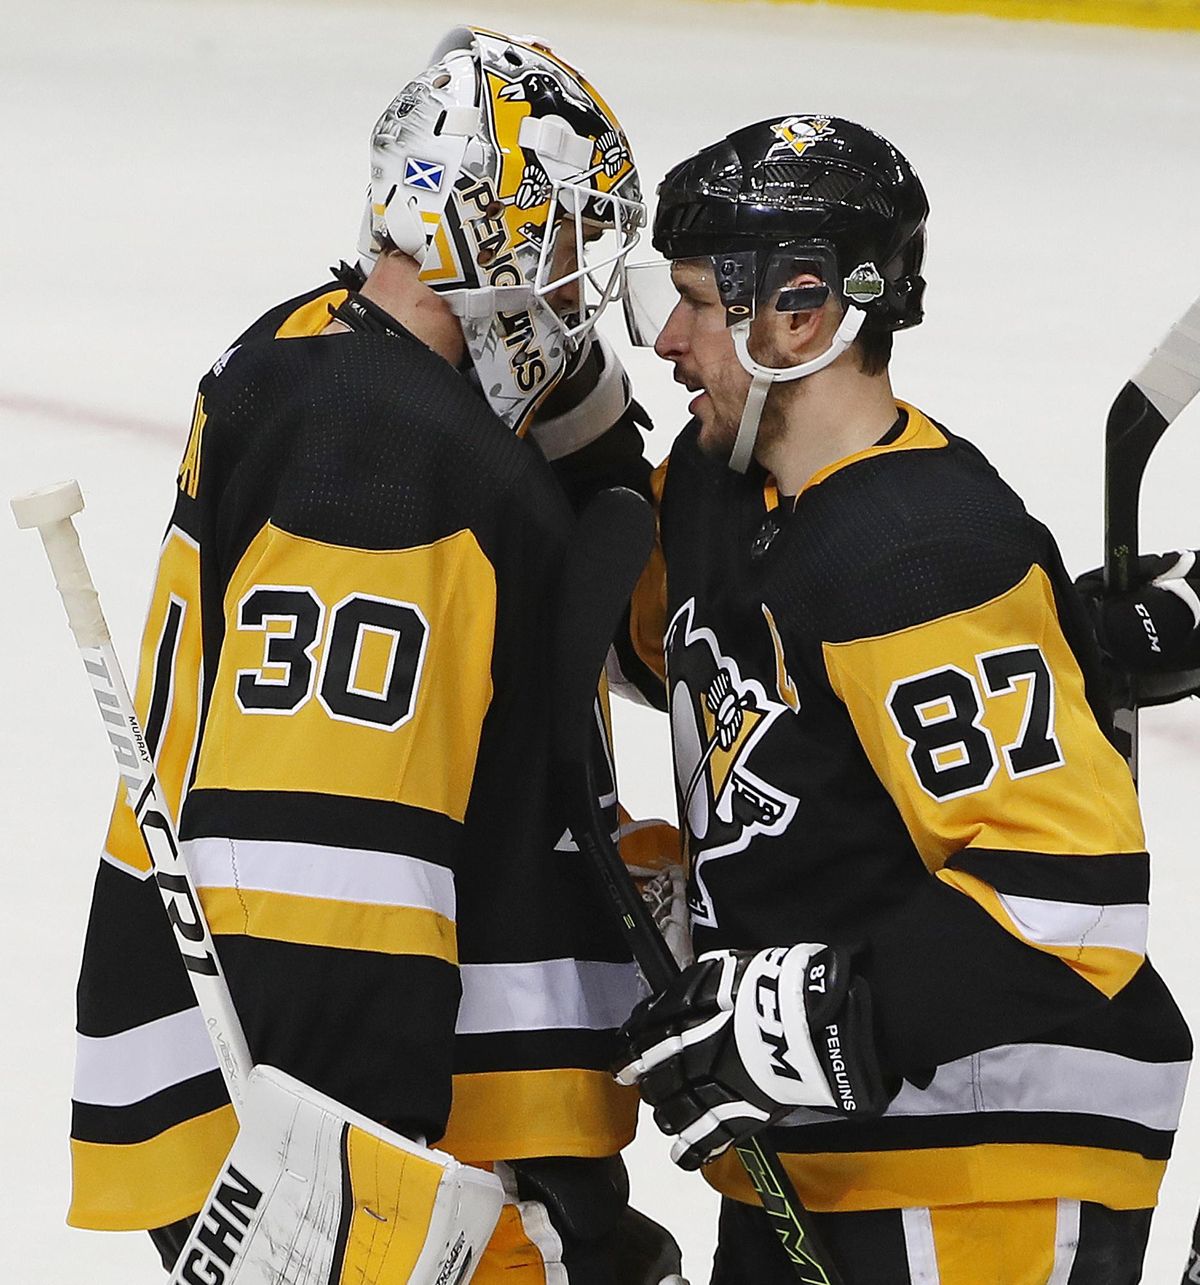 Pittsburgh Penguins’ Sidney Crosby (87) congratulates goal tender Matt Murray (30) after a 7-0 shutout of the Philadelphia Flyers in Game 1 of an NHL first-round hockey playoff series in Pittsburgh, Wednesday, April 11, 2018. Crosby had his third career playoff hat trick in the game. (Gene J. Puskar / Associated Press)